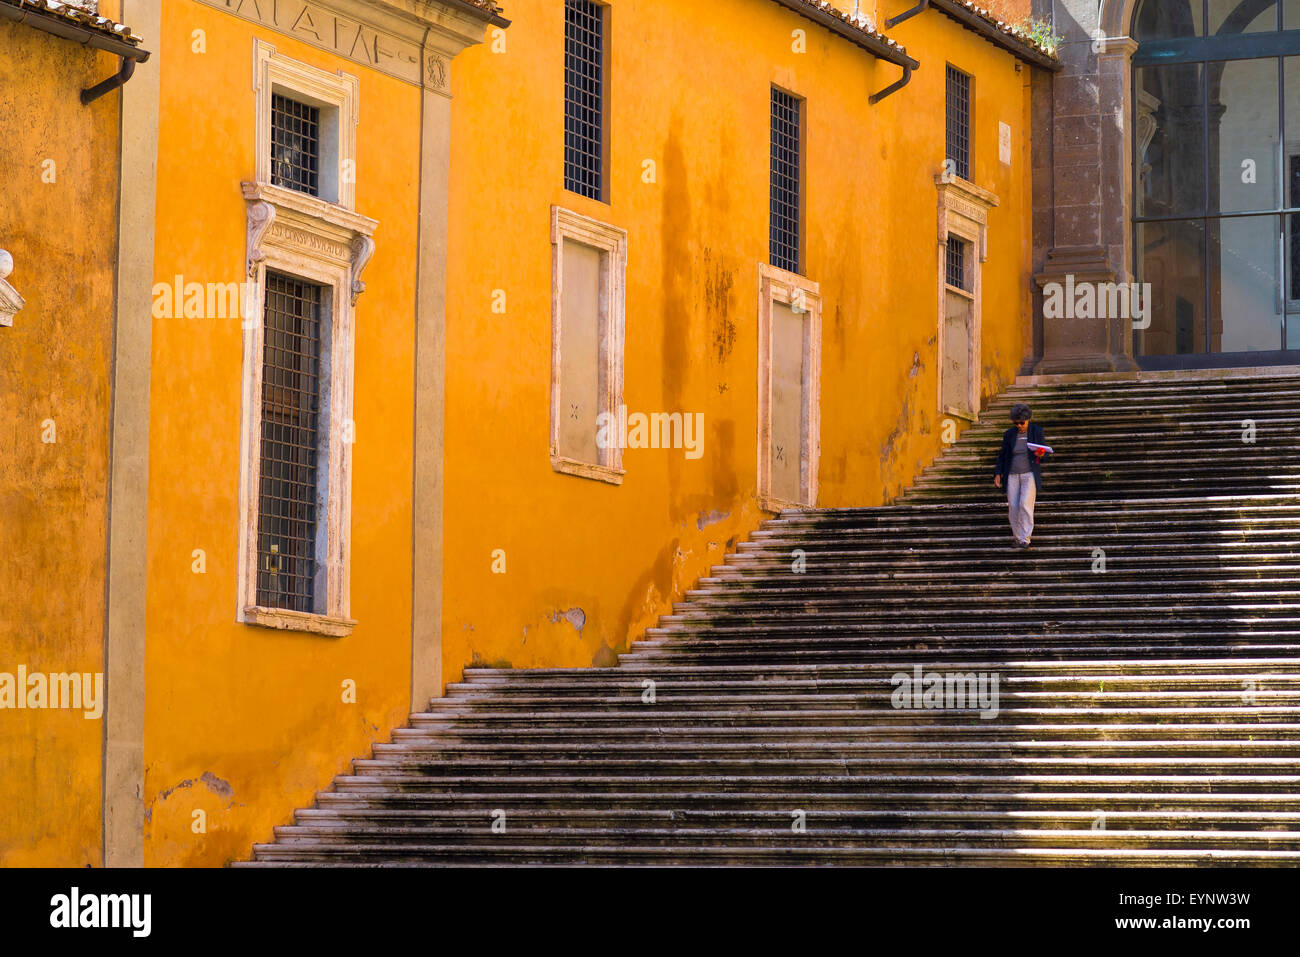 Rome Capitoline, view of a woman descending a staircase leading to the Capitoline Museum in the centre of the city of Rome, Italy. Stock Photo